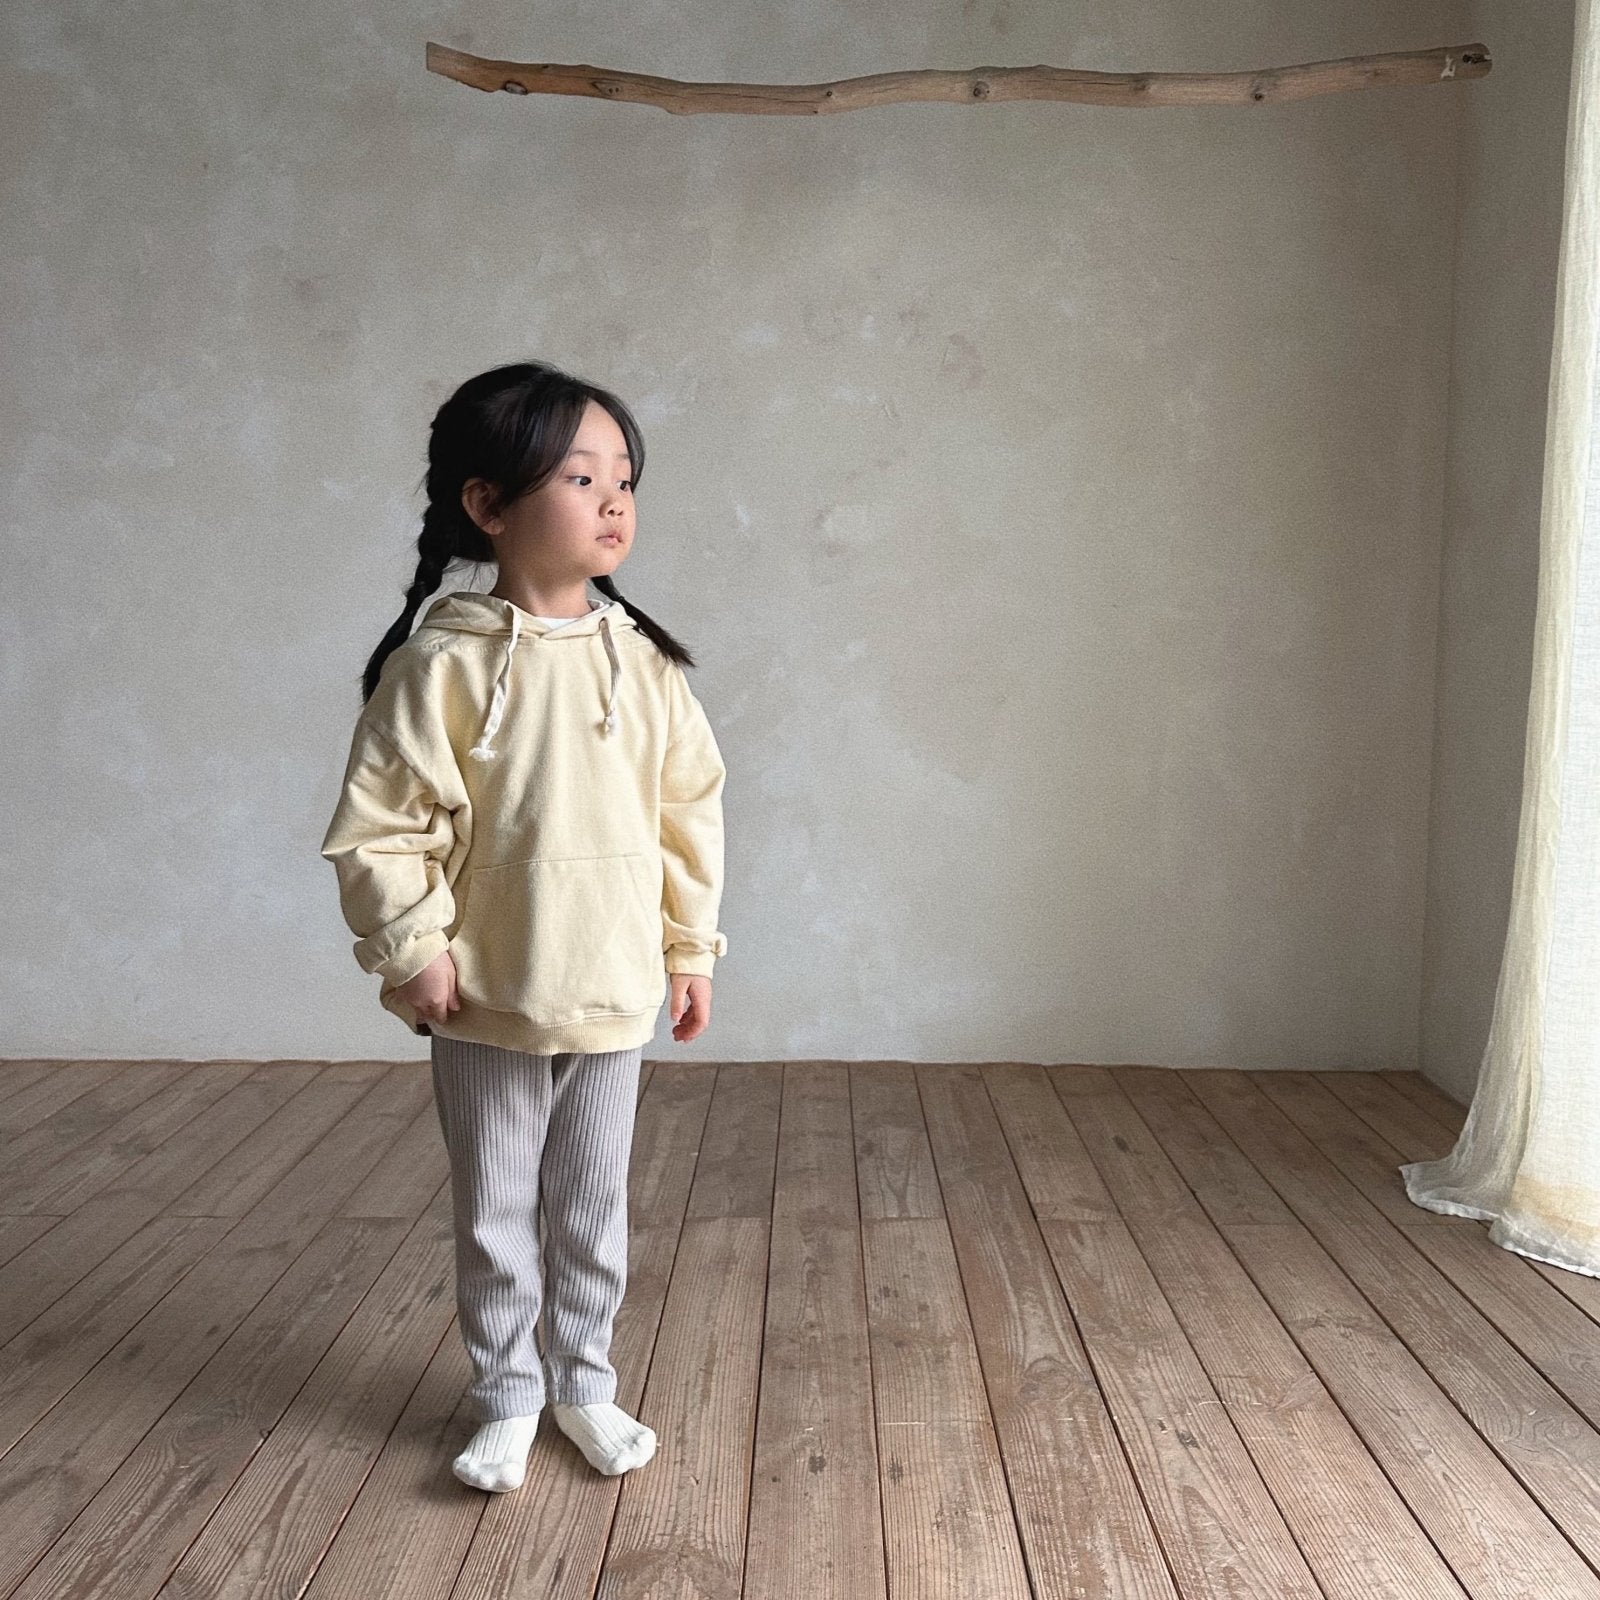 Comfortable Pants find Stylish Fashion for Little People- at Little Foxx Concept Store